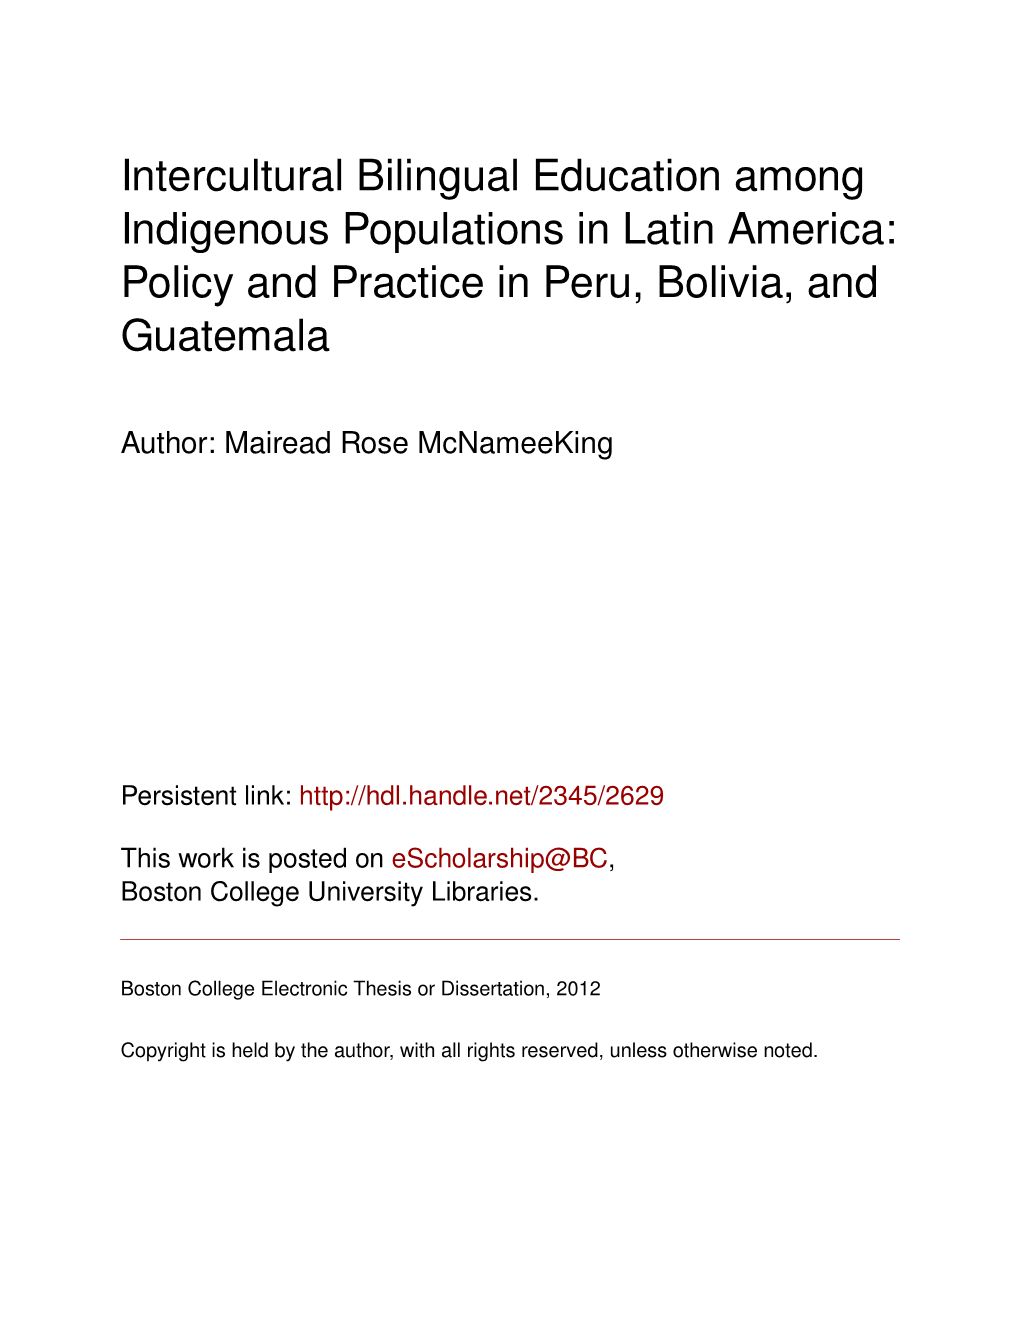 Intercultural Bilingual Education Among Indigenous Populations in Latin America: Policy and Practice in Peru, Bolivia, and Guatemala